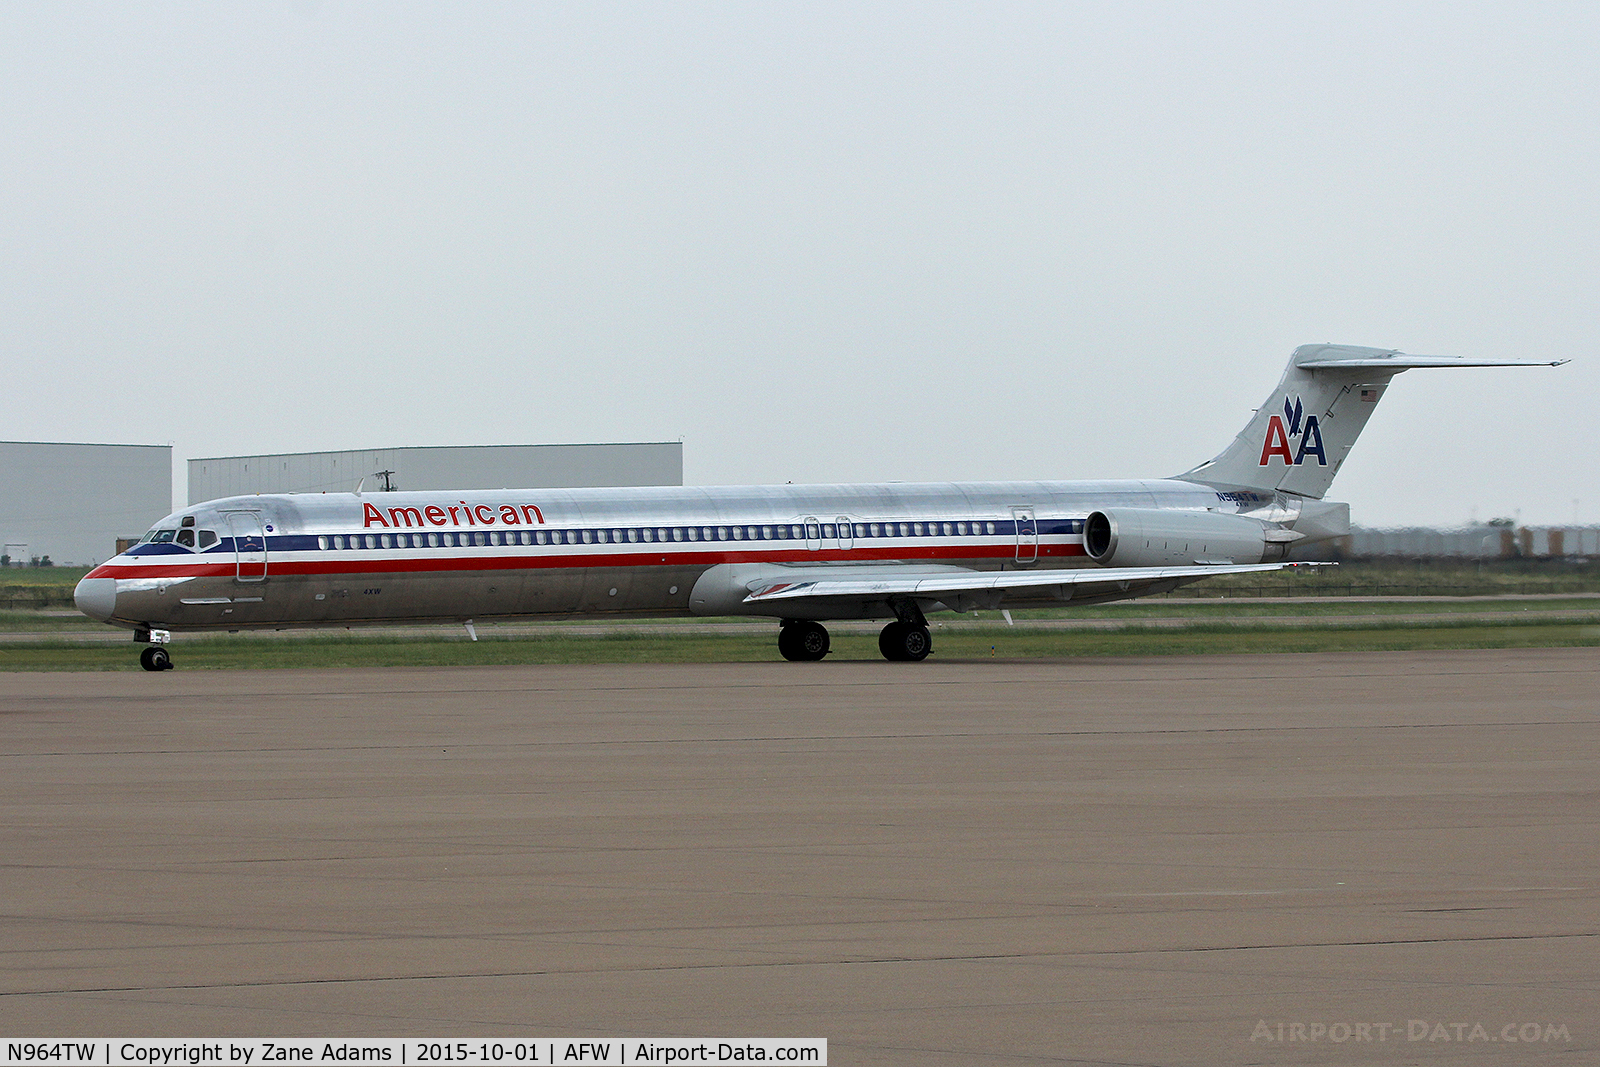 N964TW, 1999 McDonnell Douglas MD-83 (DC-9-83) C/N 53614, At Alliance Airport - Fort Worth,TX